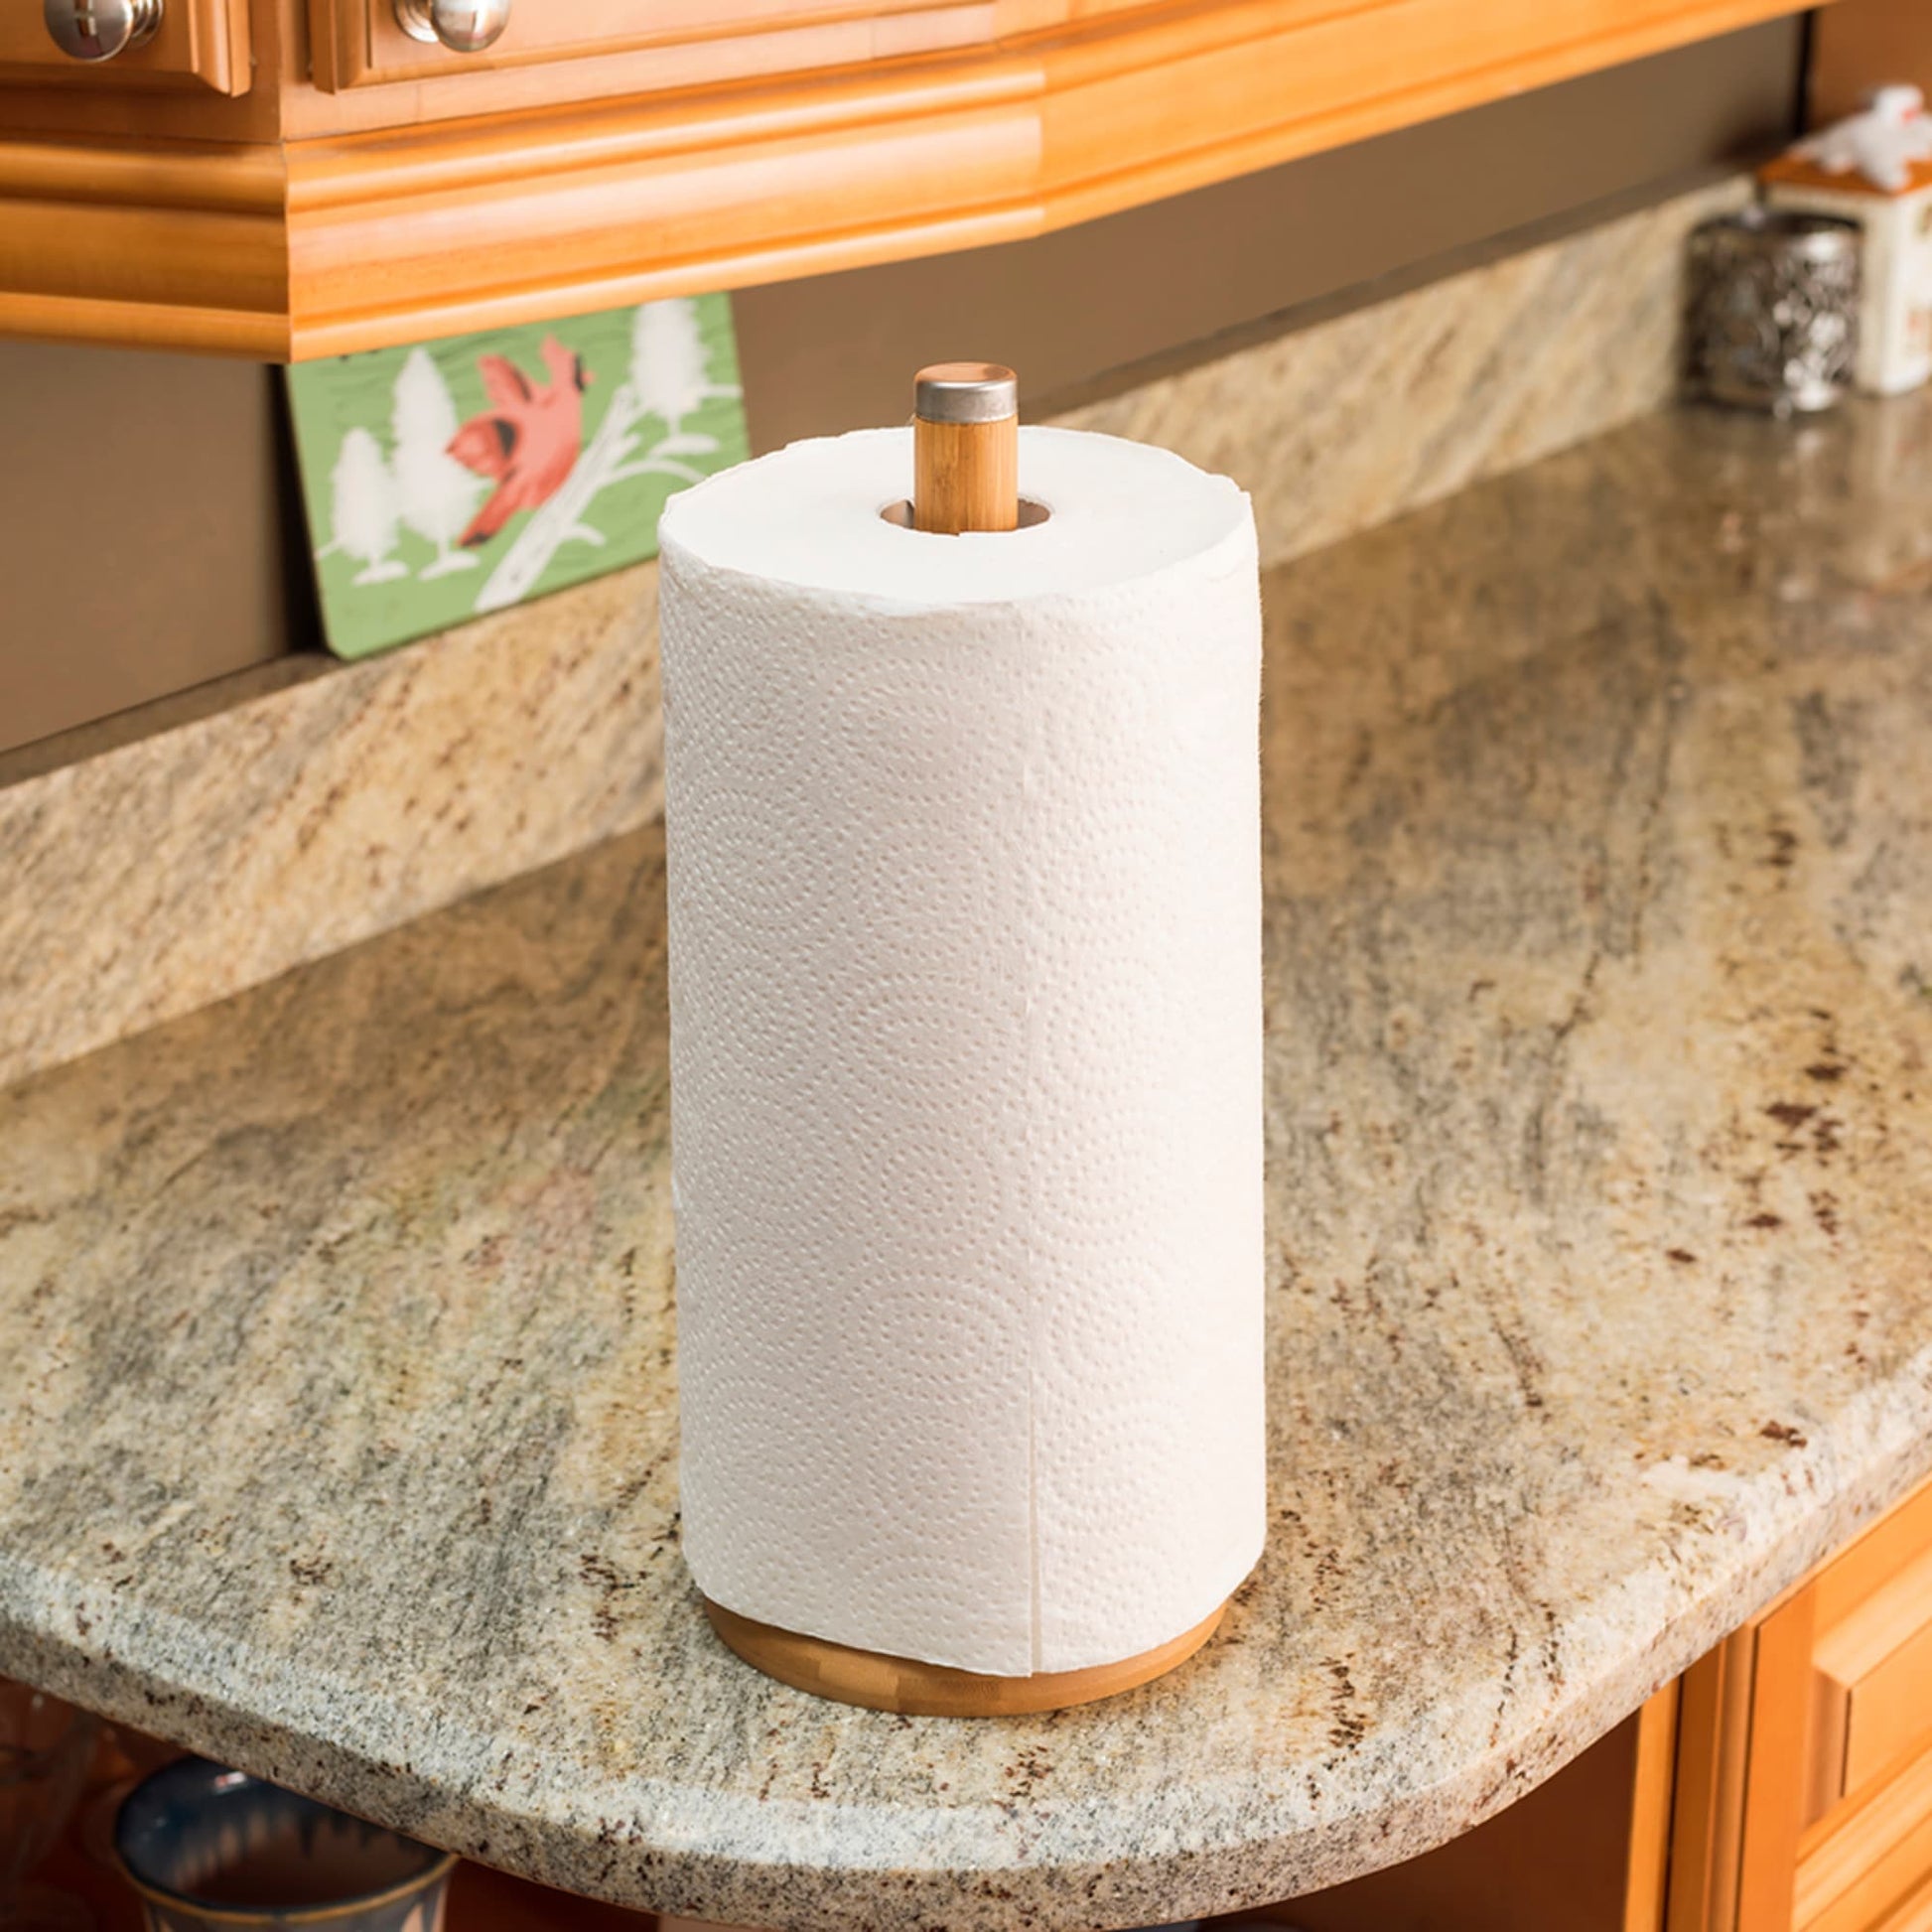 Home Basics Wall-Mounted Paper Towel Holder 